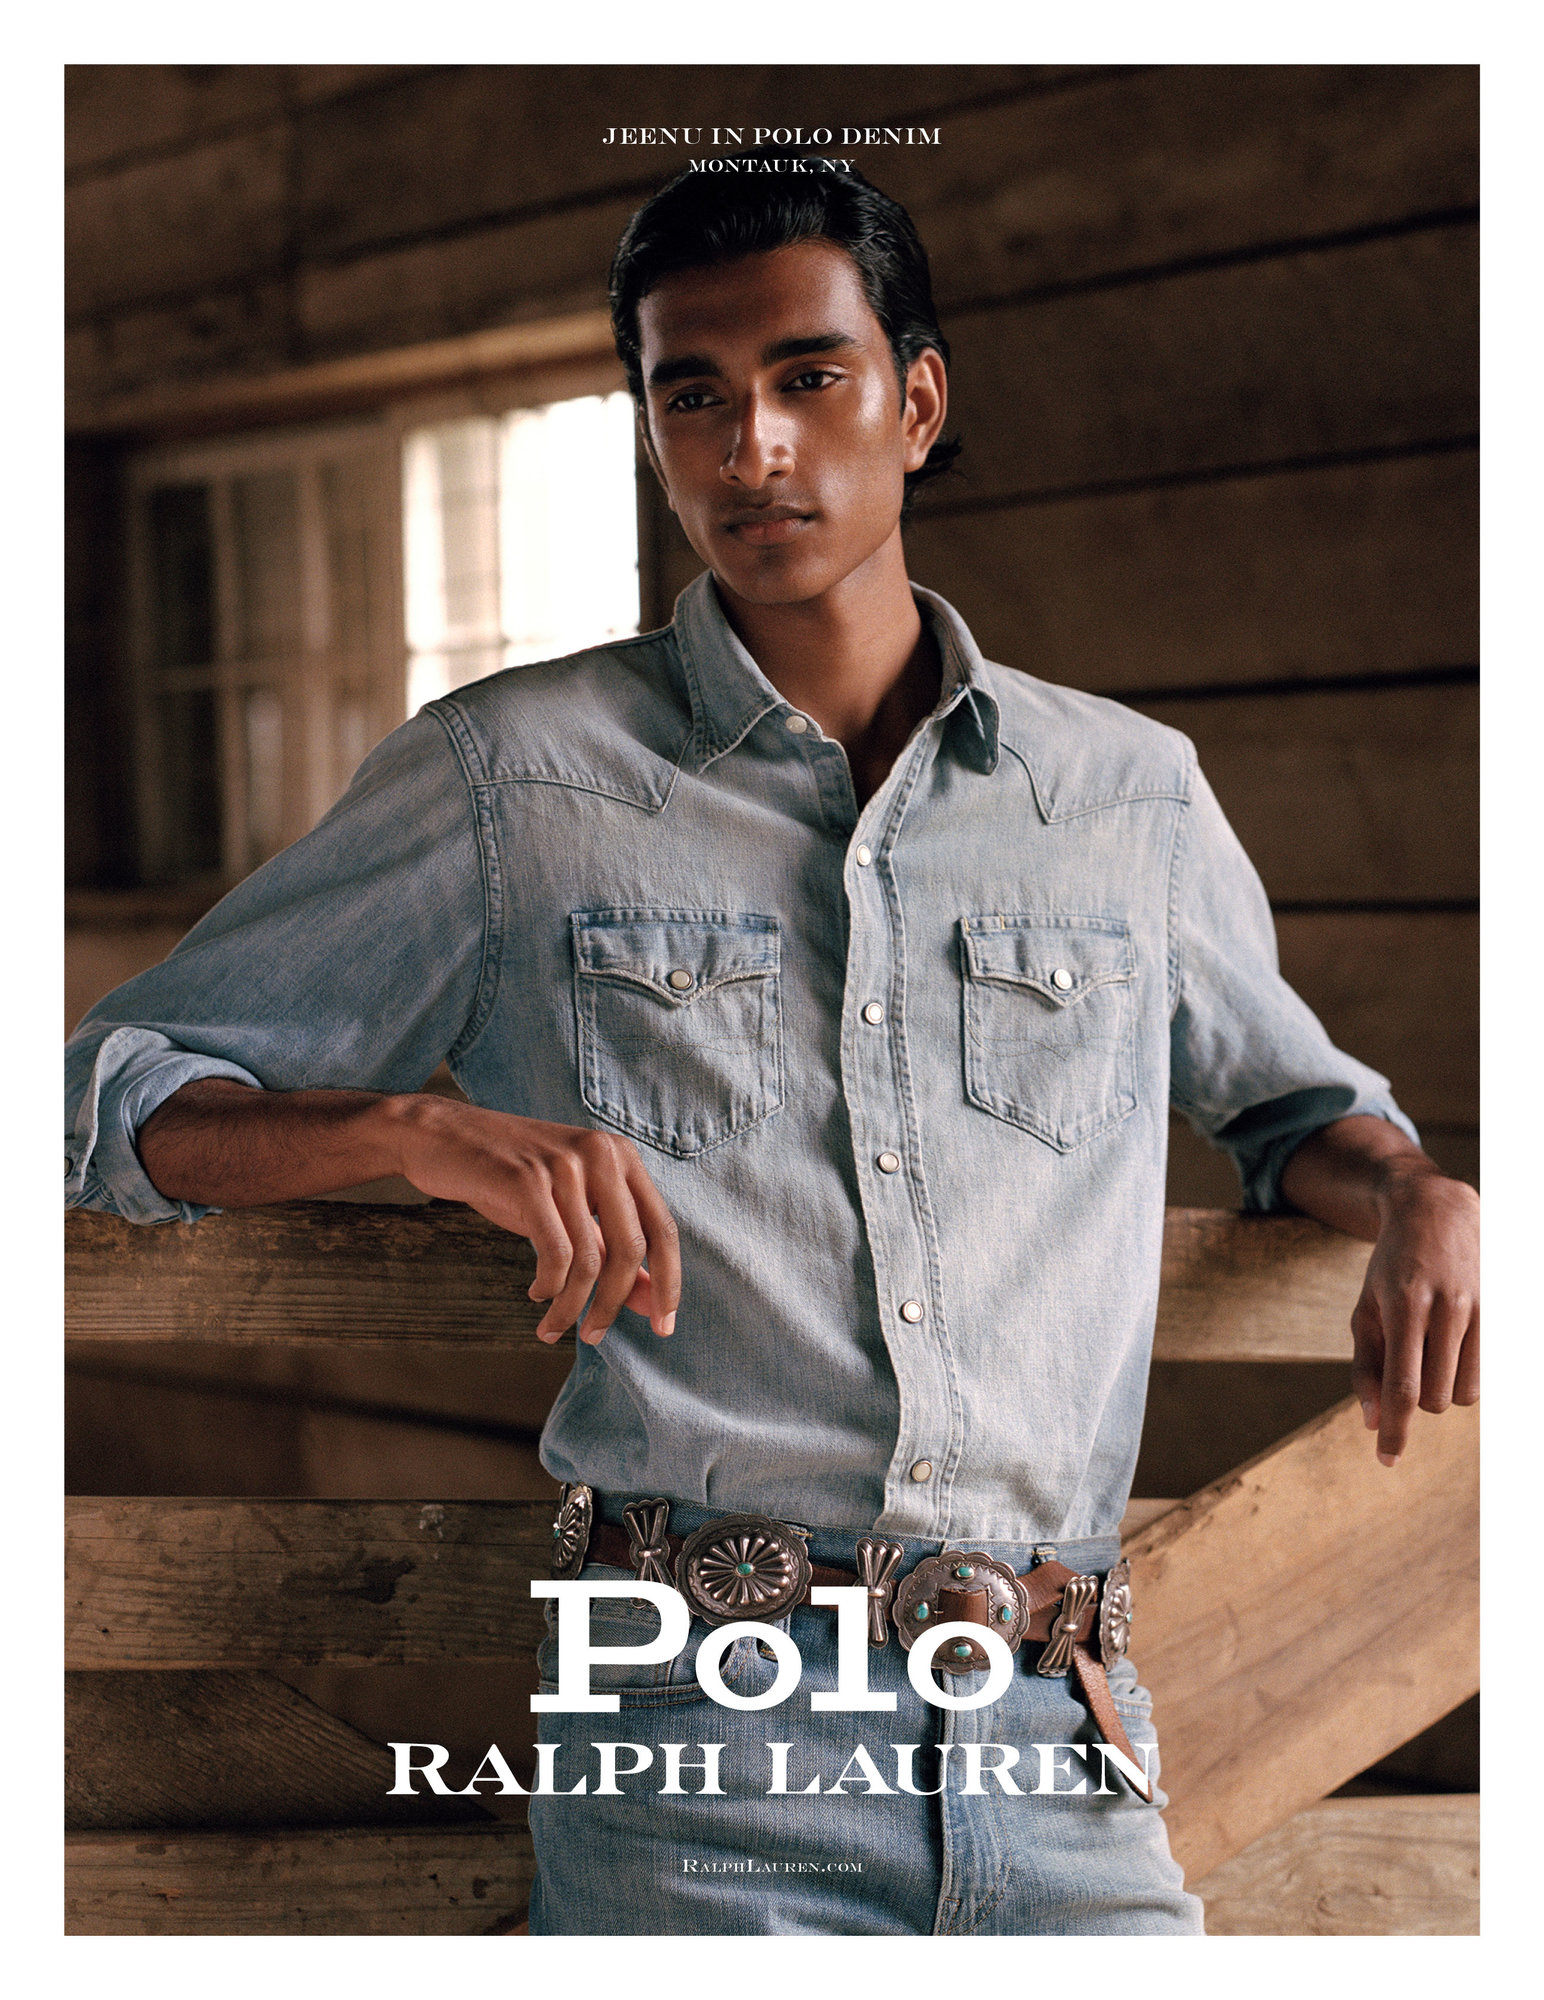 Brand Strategies and Marketing Campaigns of Ralph Lauren